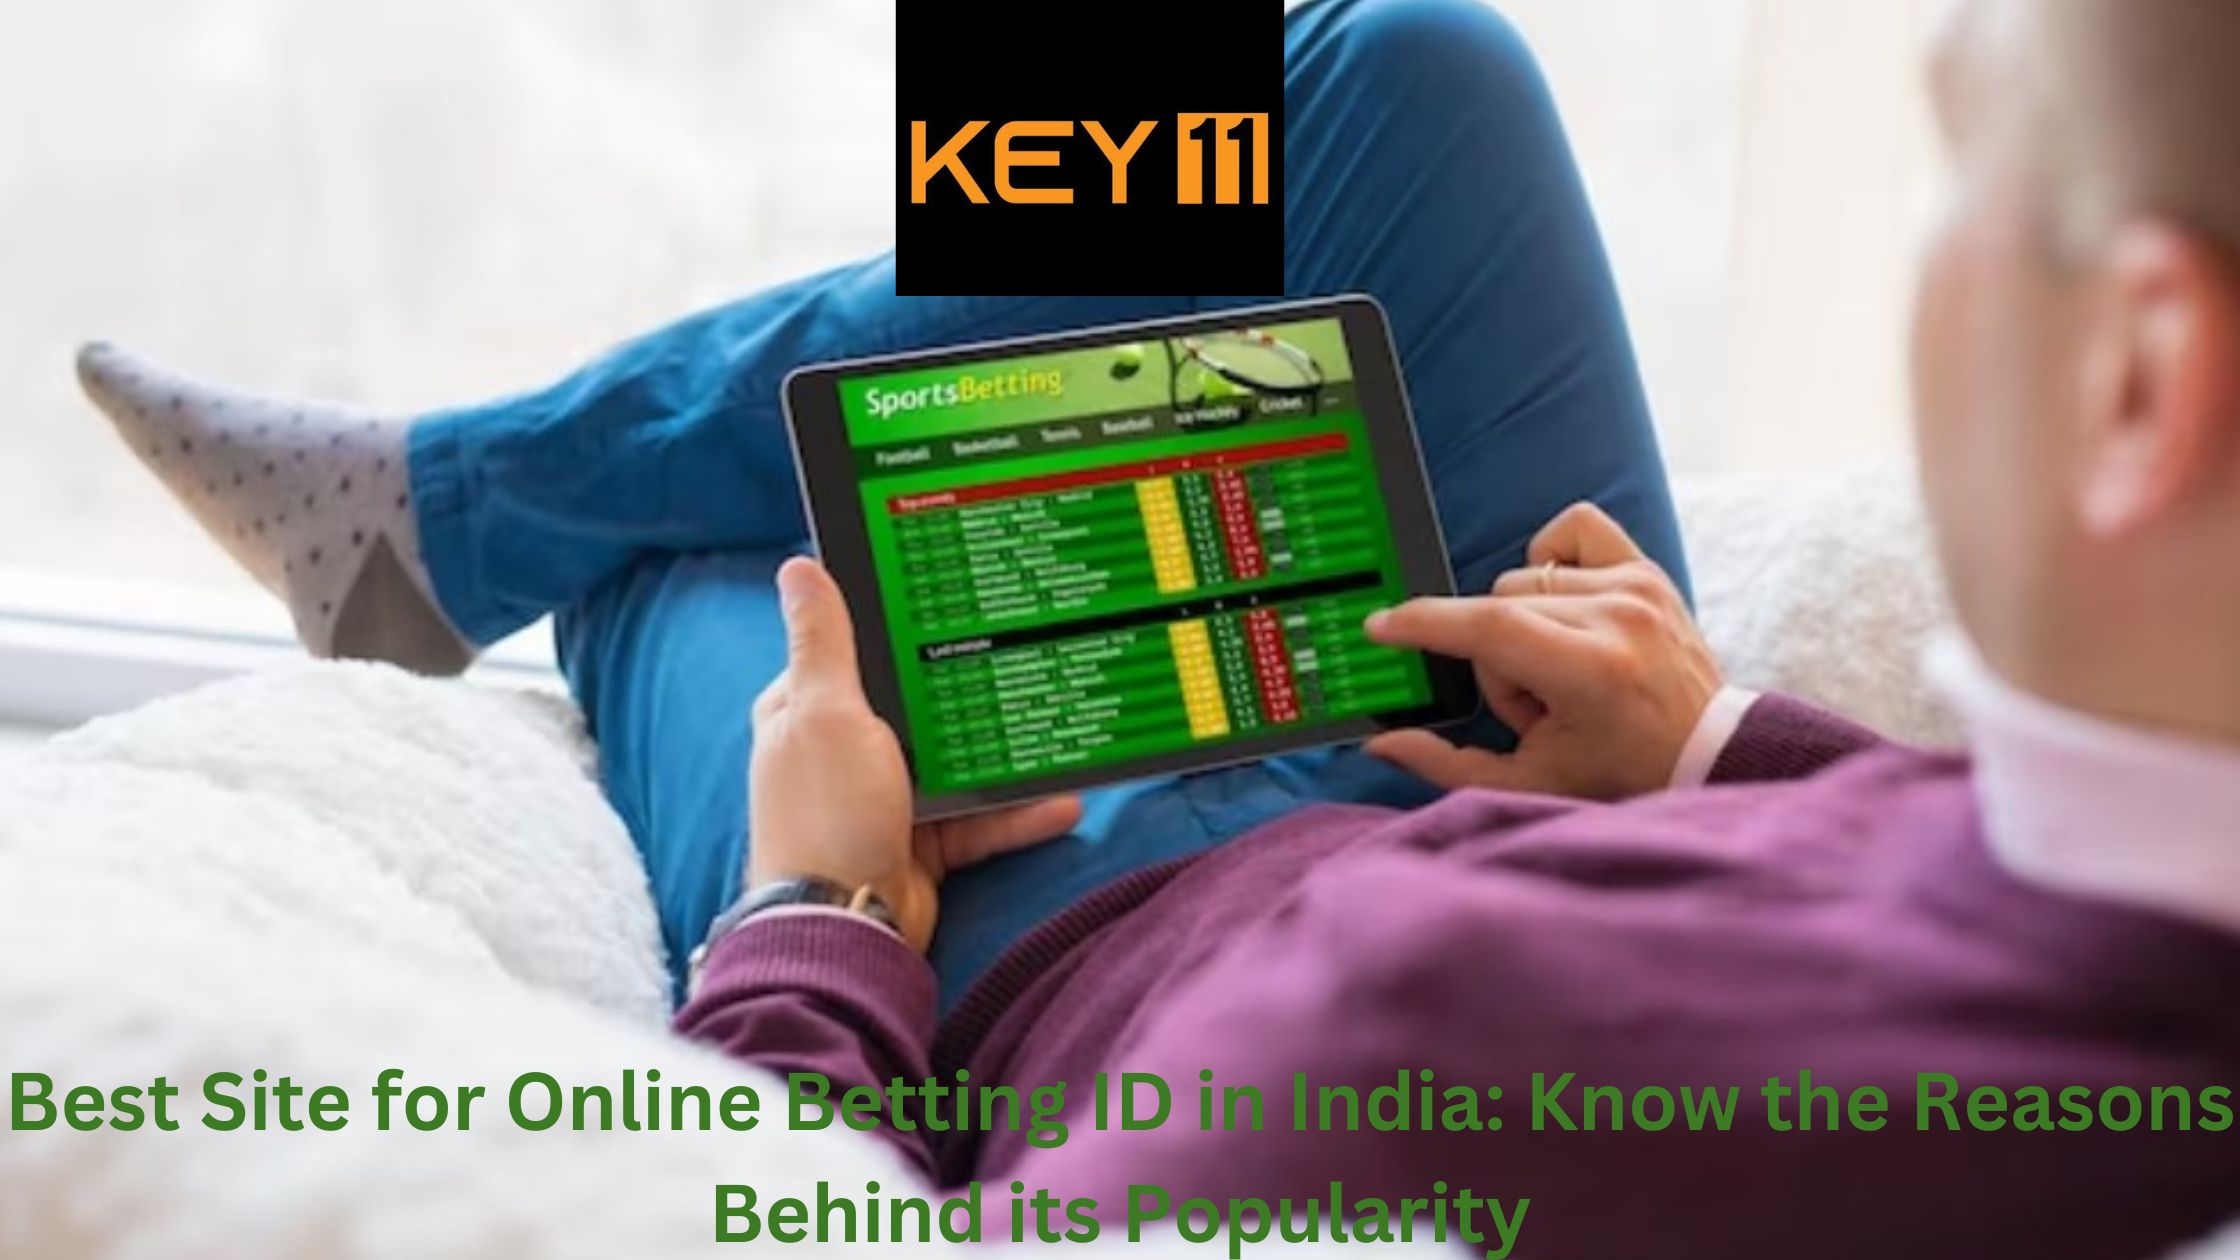 Best Site for Online Betting ID in India